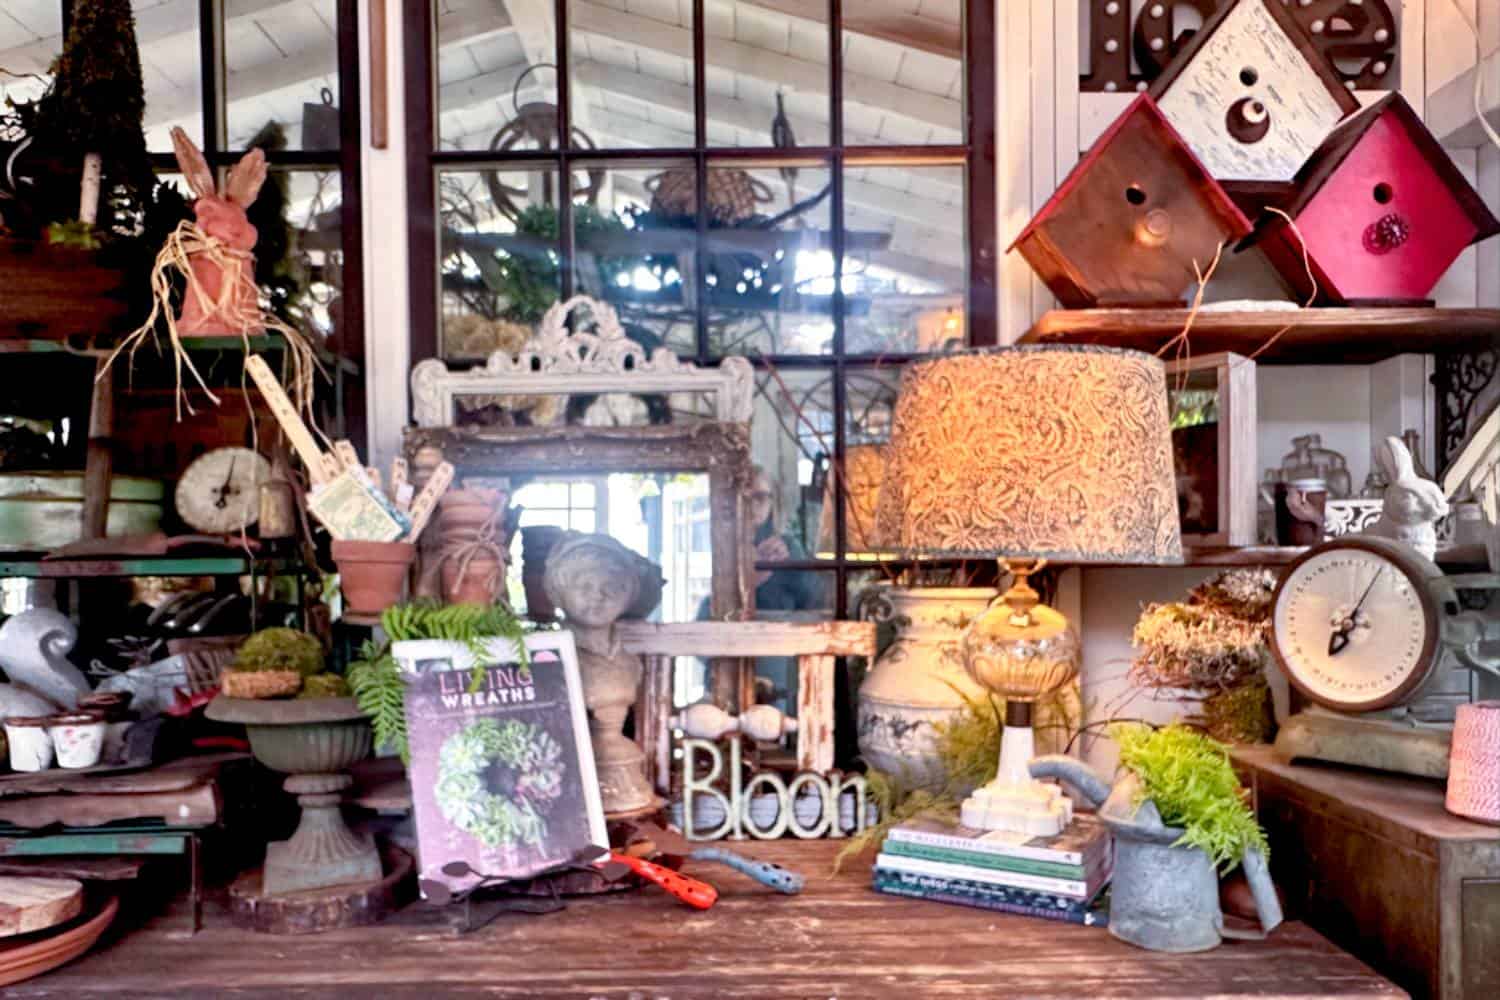 The work desk inside the She Shed styled for summer with vintage garden decor and a lamp